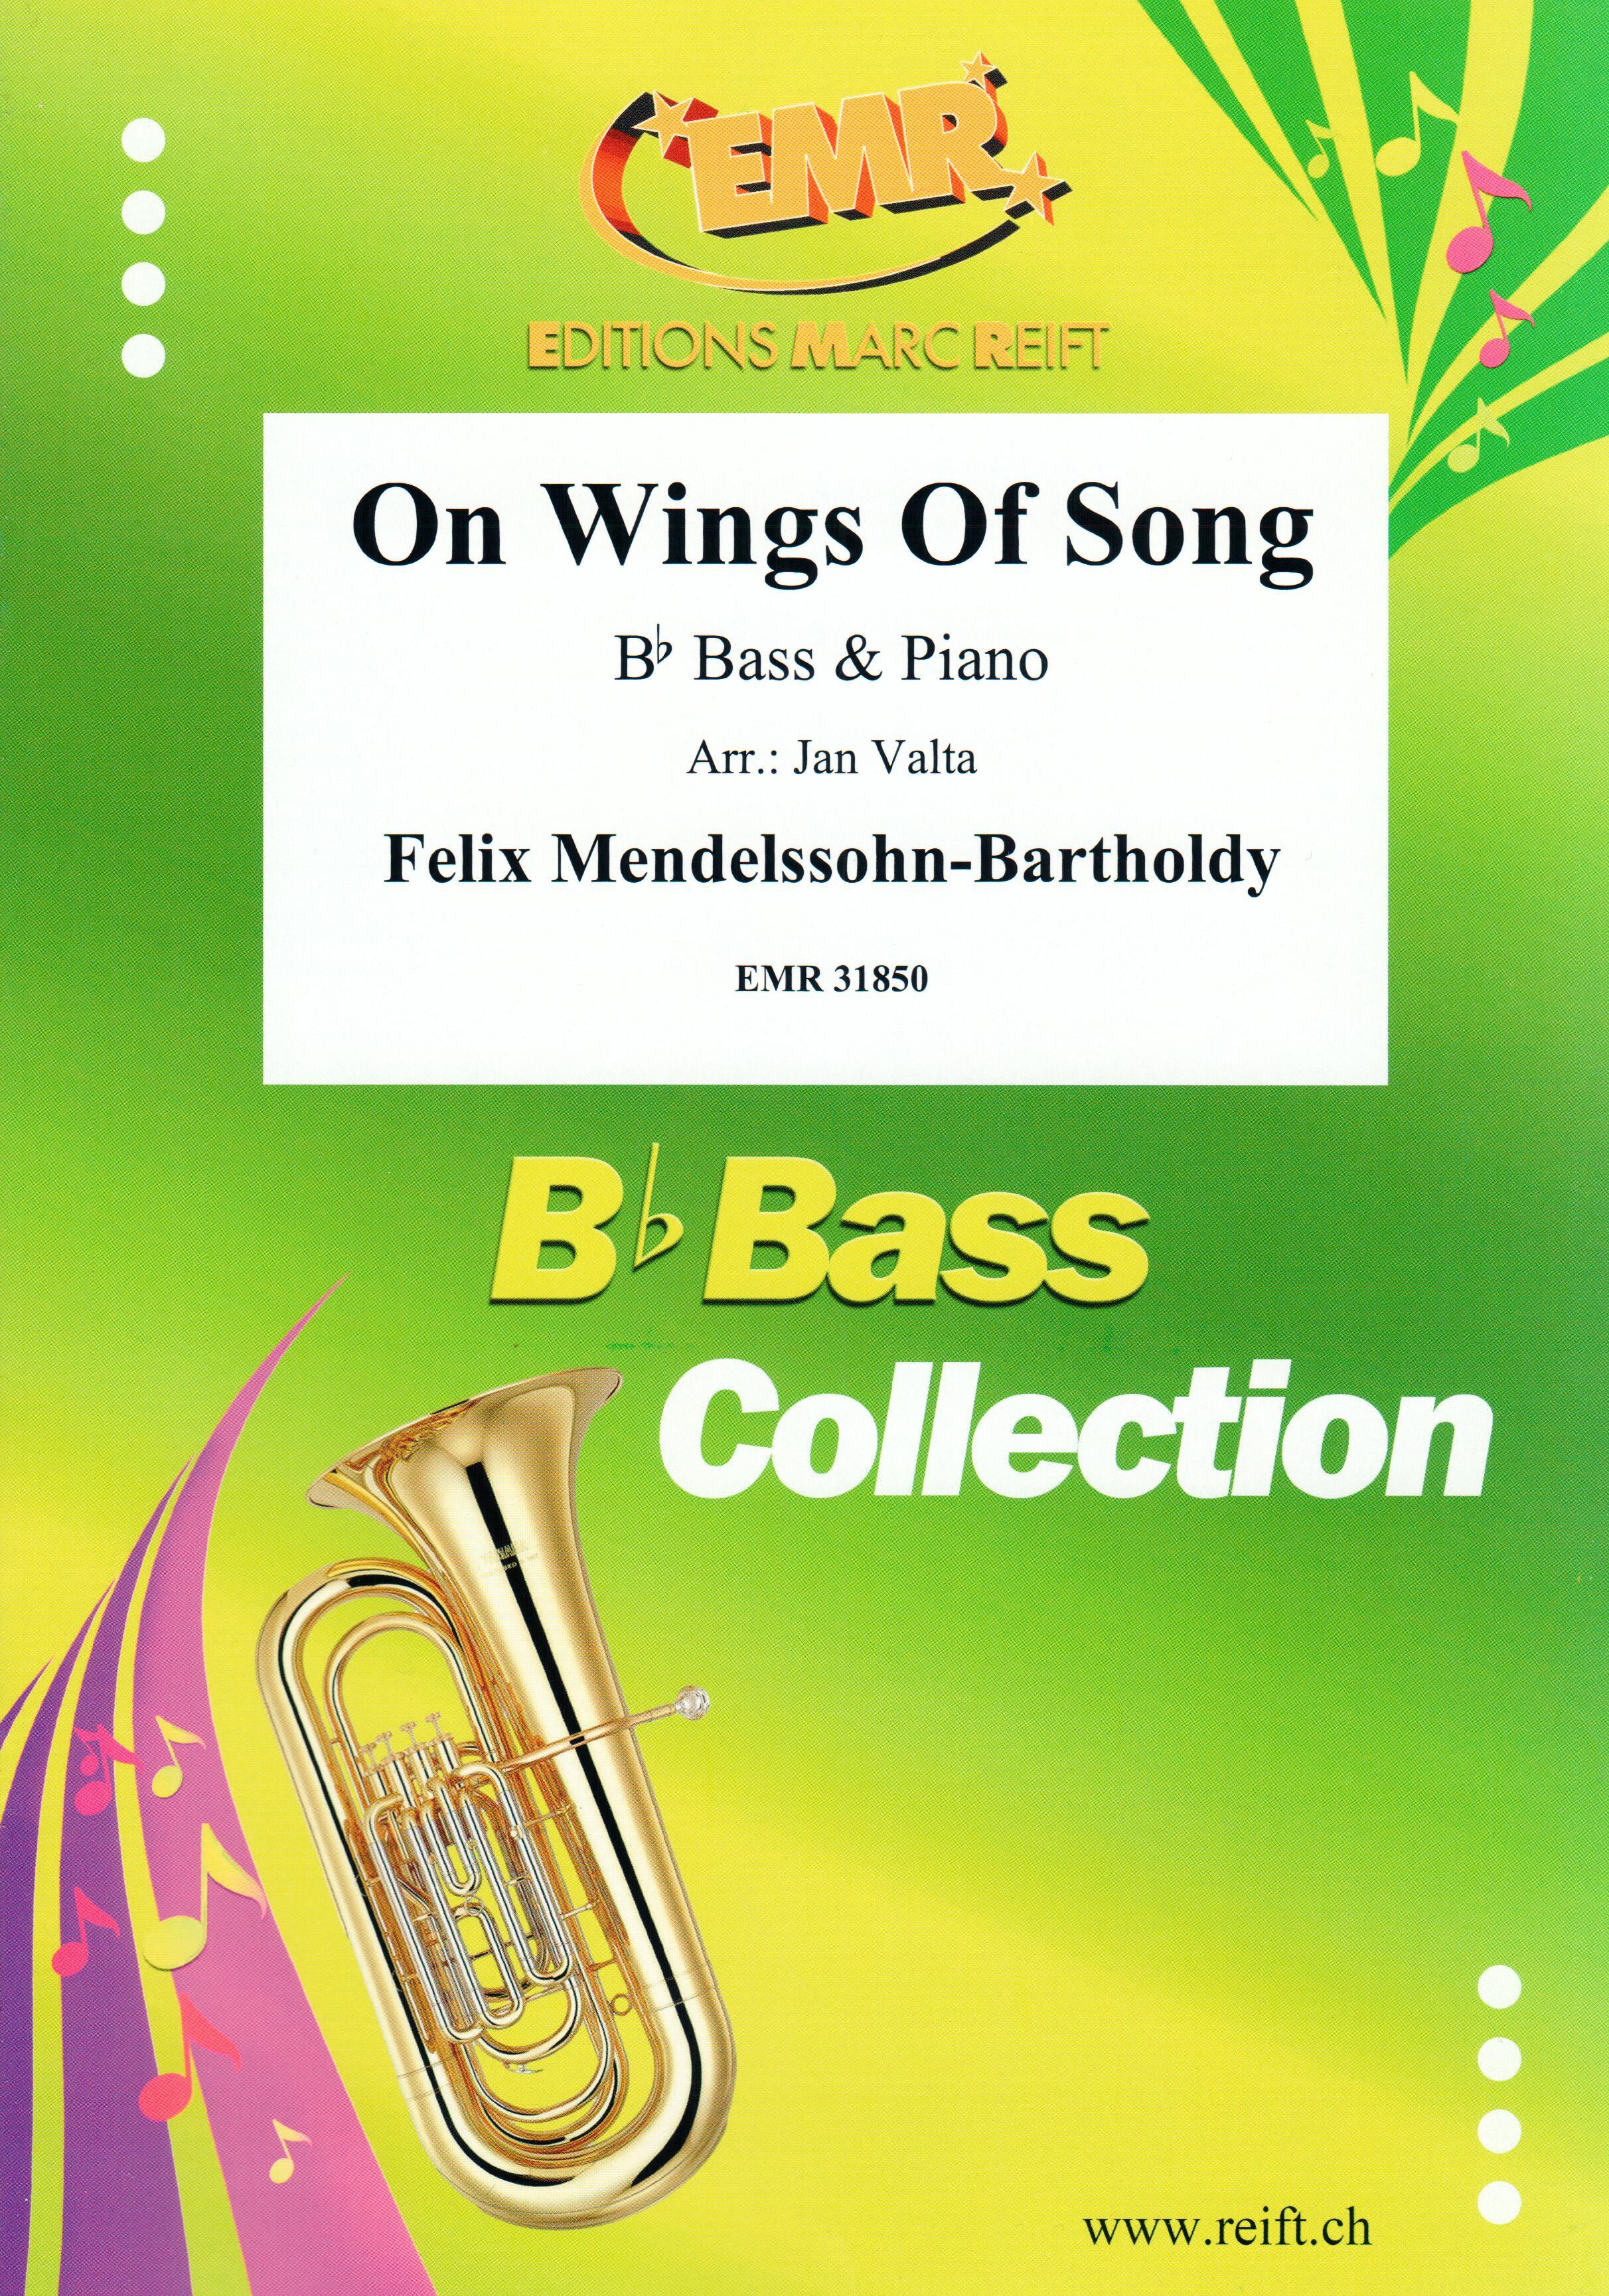 ON WINGS OF SONG